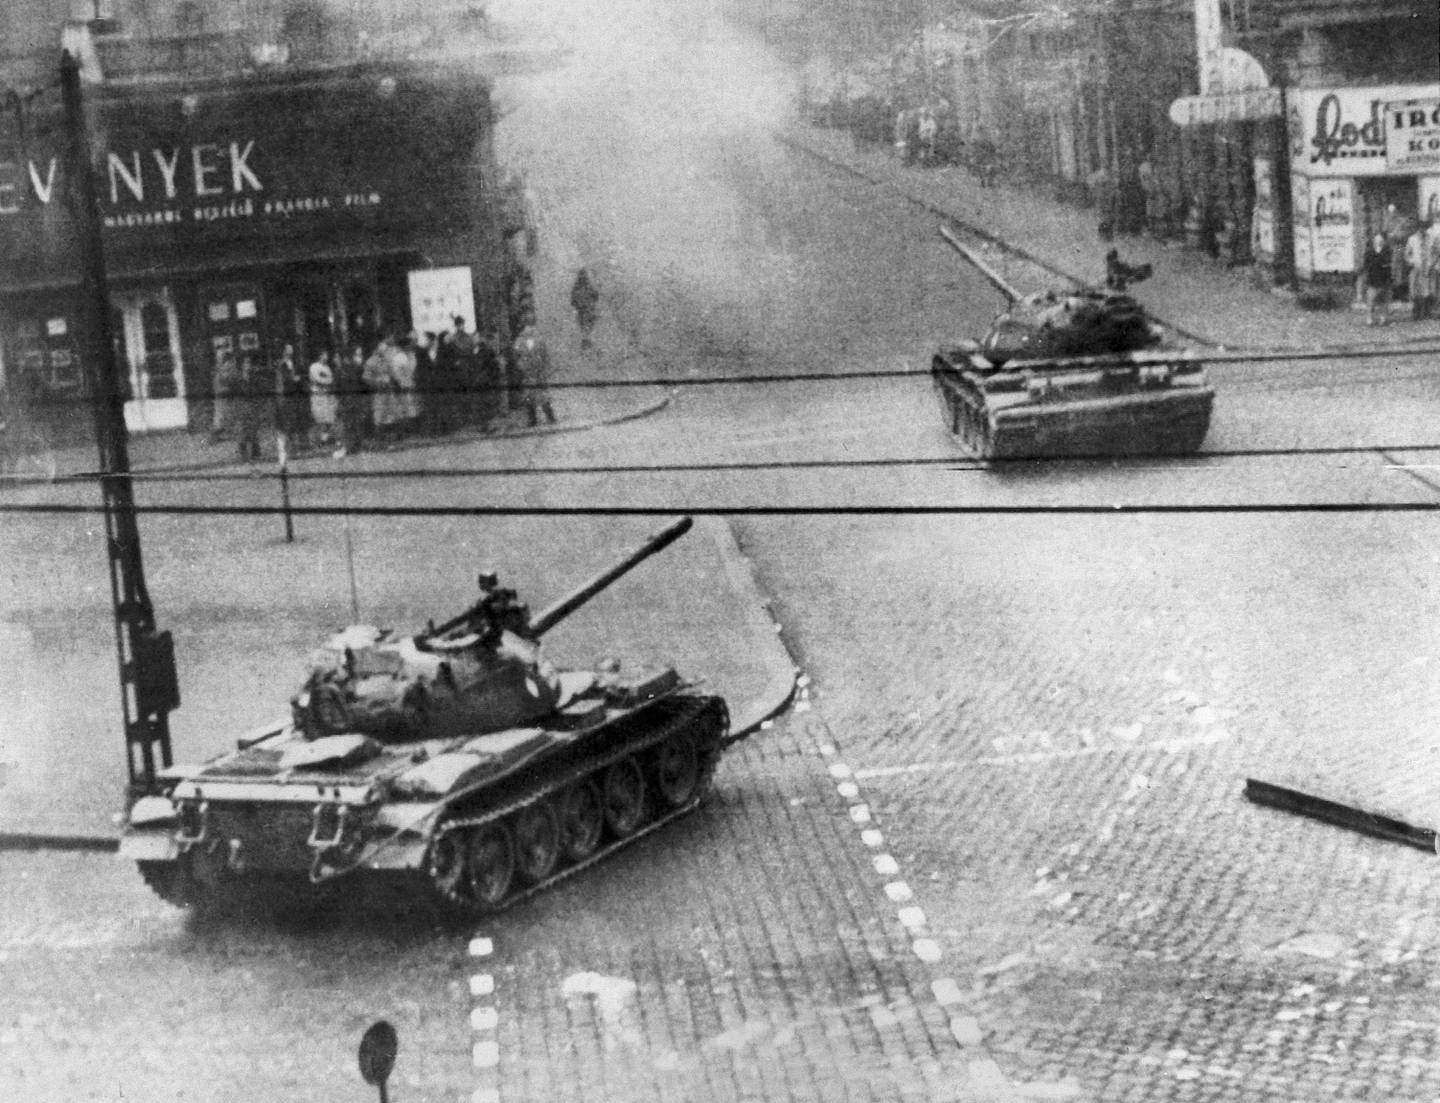 Soviet-built tanks wheel into action in a smoke-filled Budapest street in Hungary's flaring revolution against communist satellite government, Oct. 27, 1956. Citizens stand close to building fronts to stay out of the line of fire. Many Hungarian Army units reportedly have gone over to the rebels in fighting against police and units of the Soviet Red Army. (AP Photo)